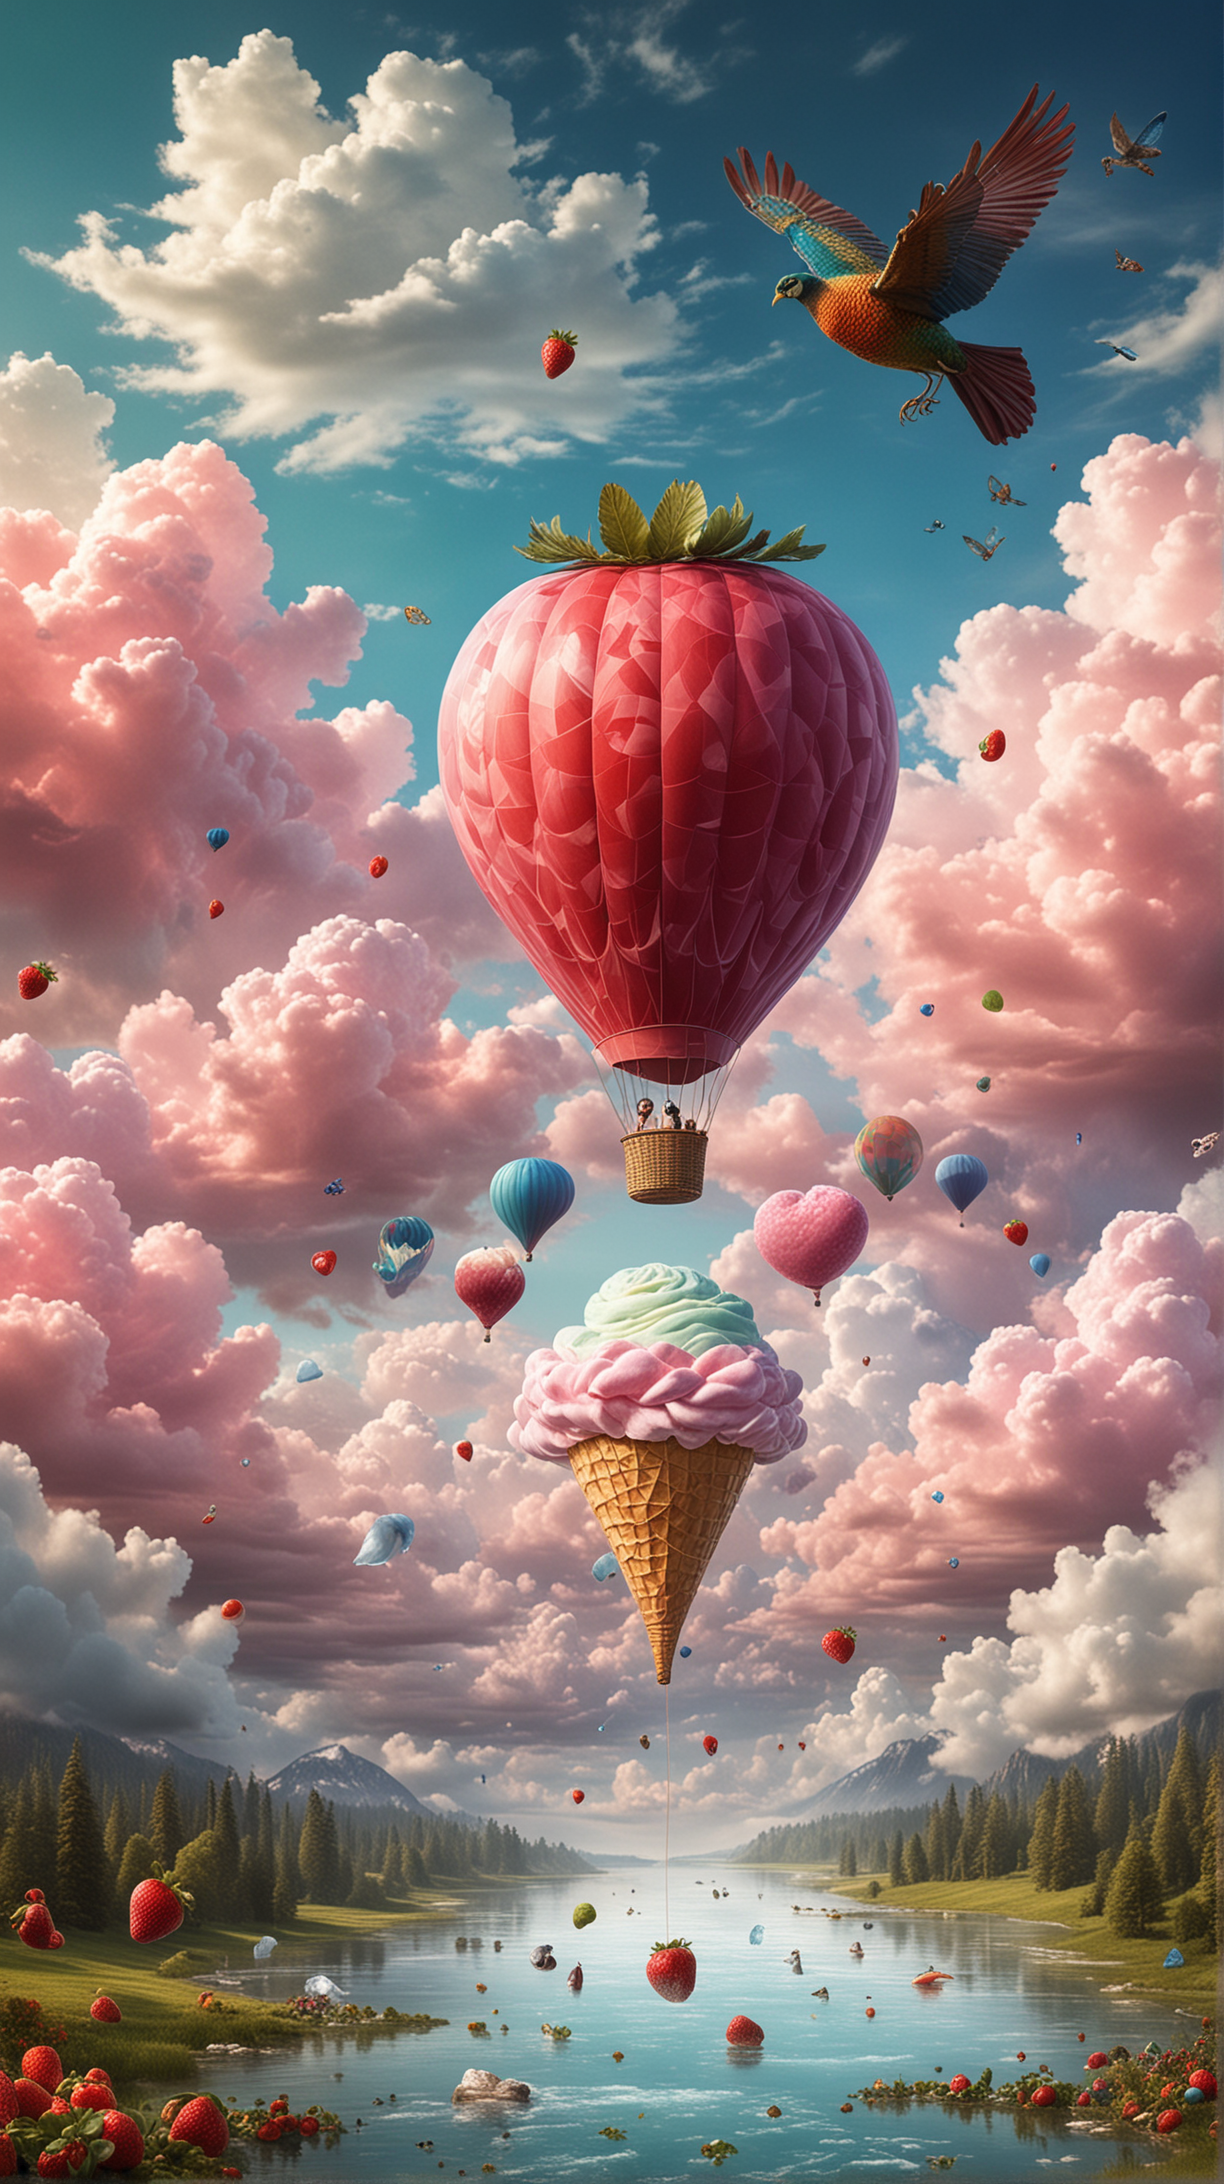 Surreal Sky Dream Hot Air Balloon Giant Strawberry and Flying Peacock